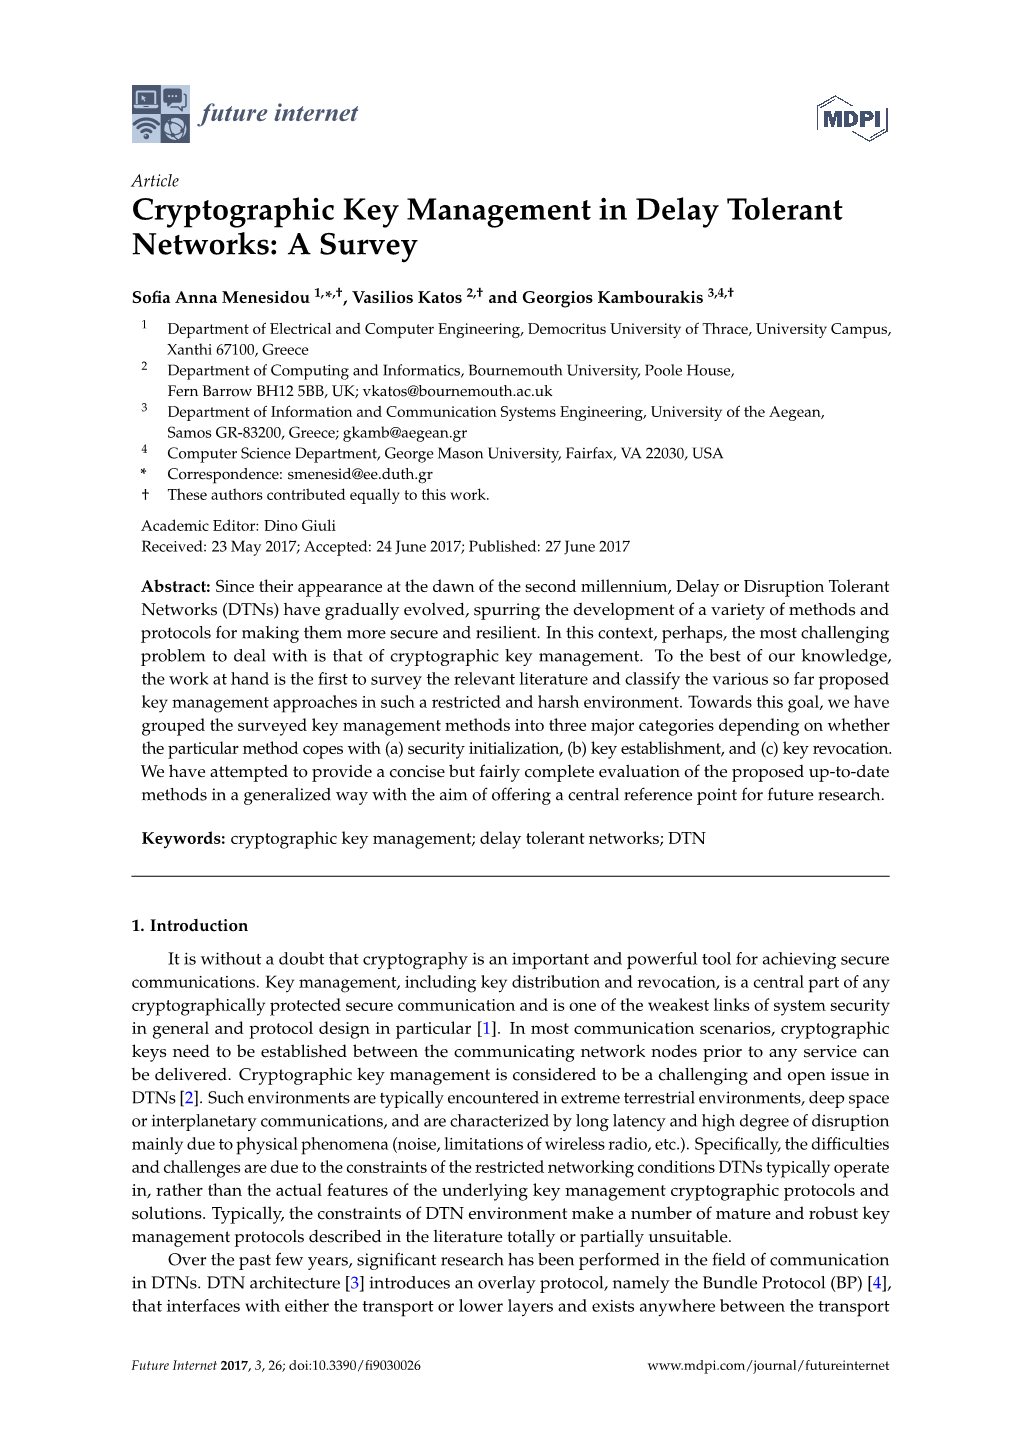 Cryptographic Key Management in Delay Tolerant Networks: a Survey